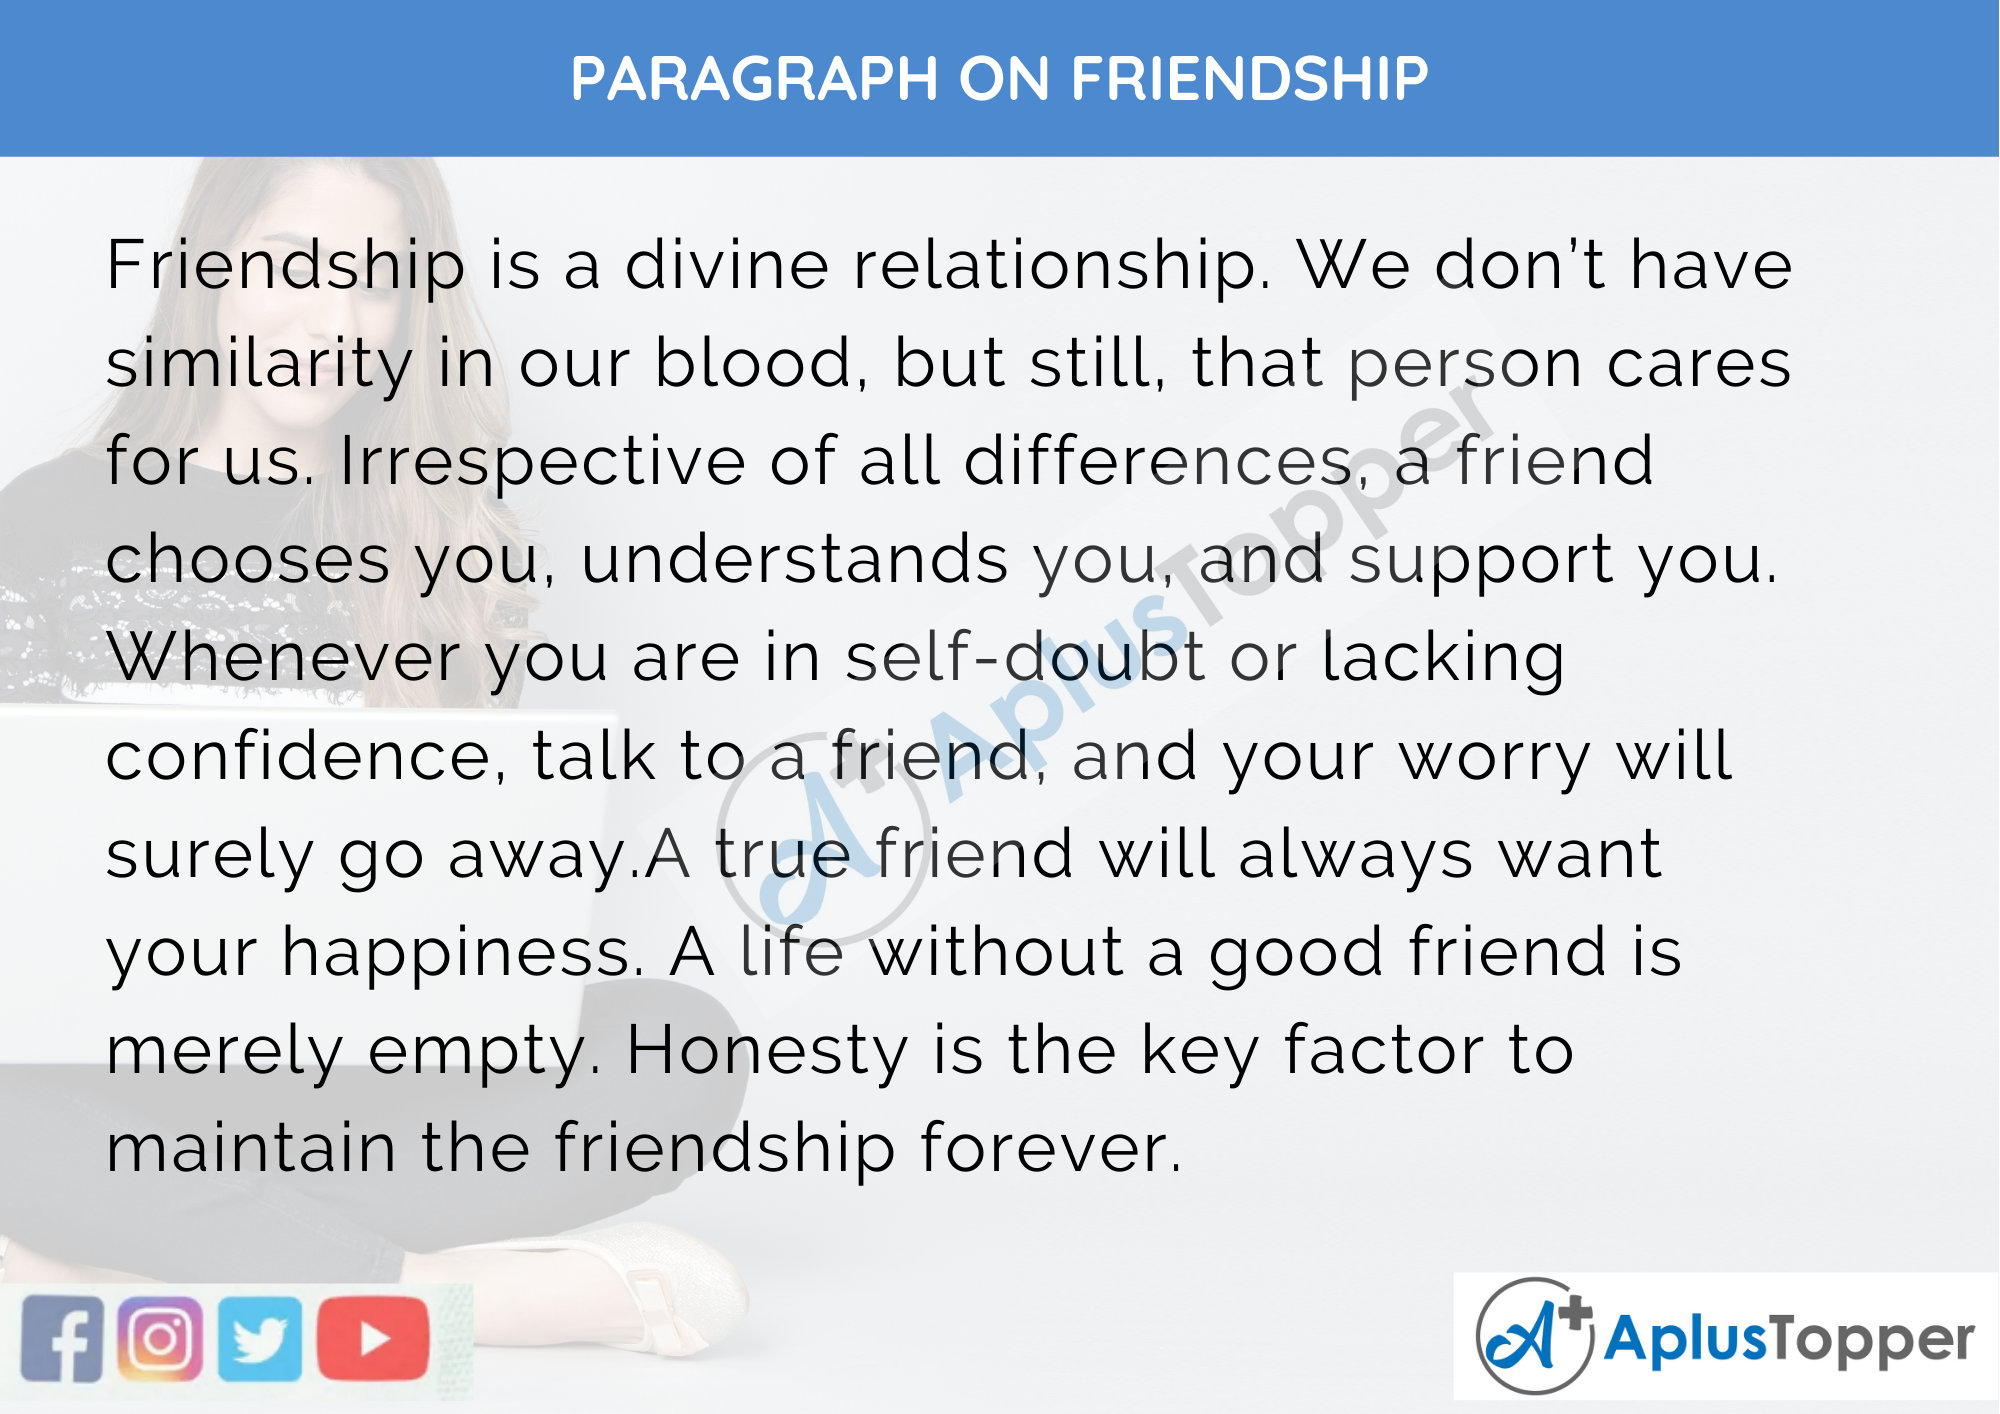 Why Is Friendship Important in Life? Here's Why